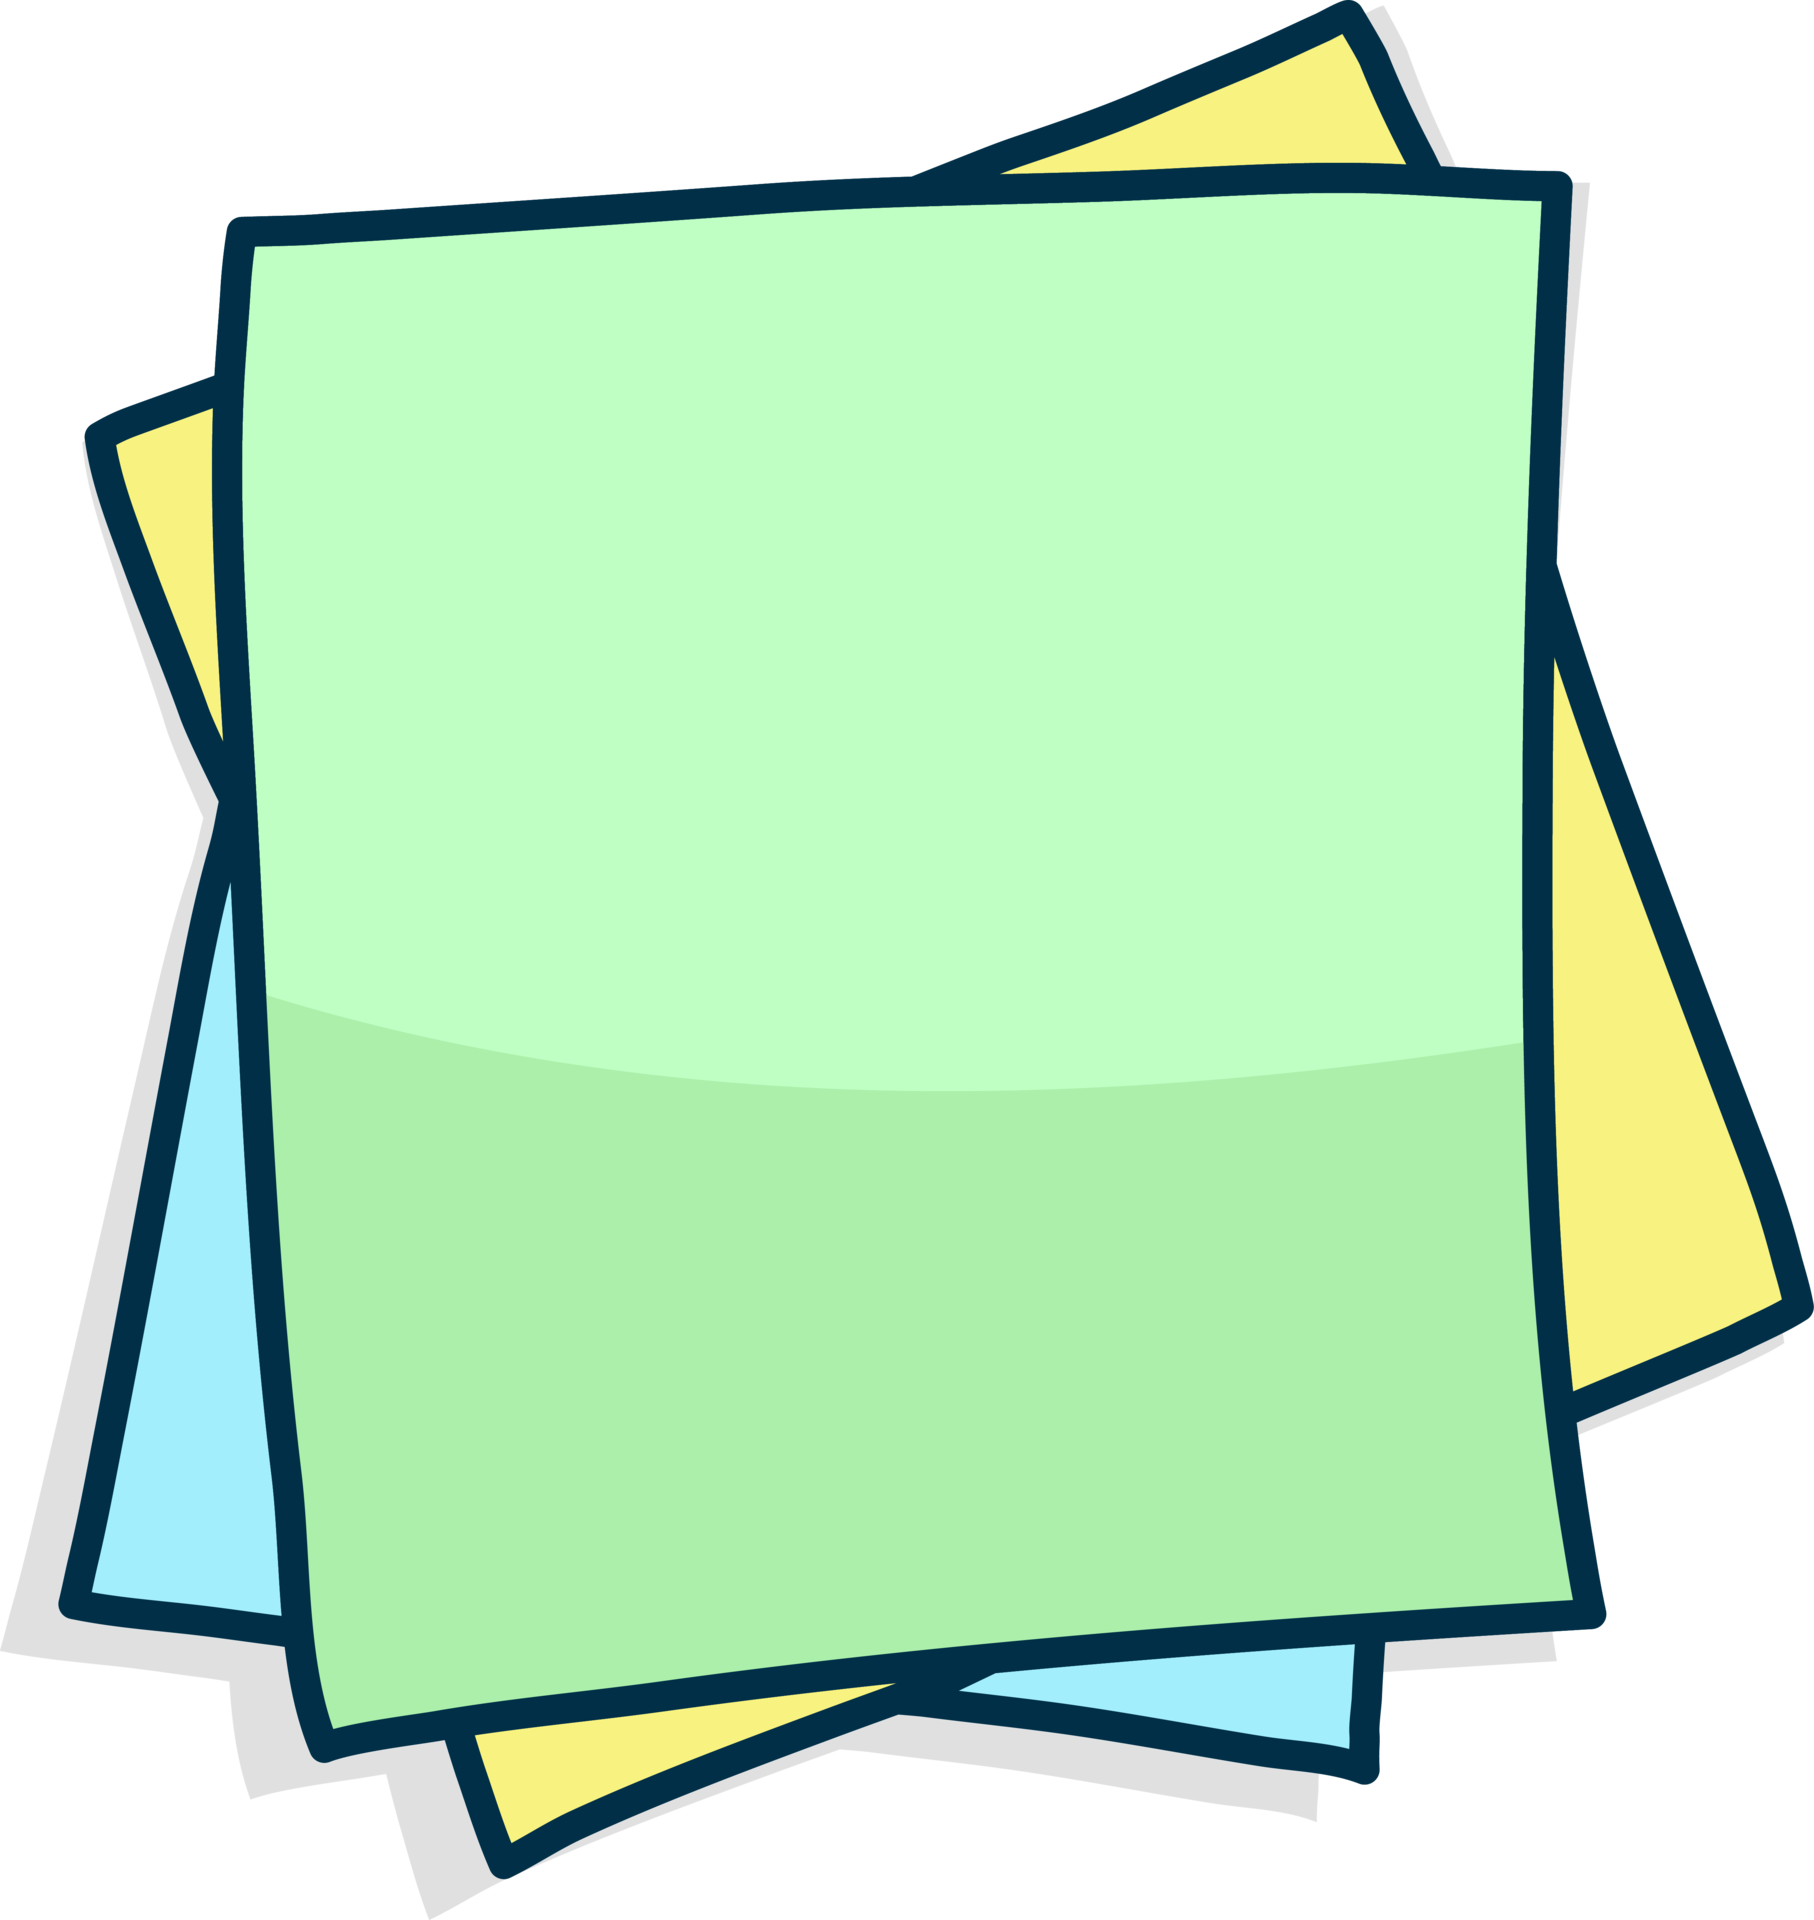 Colored post it note paper, rounded edges, sticky notes for